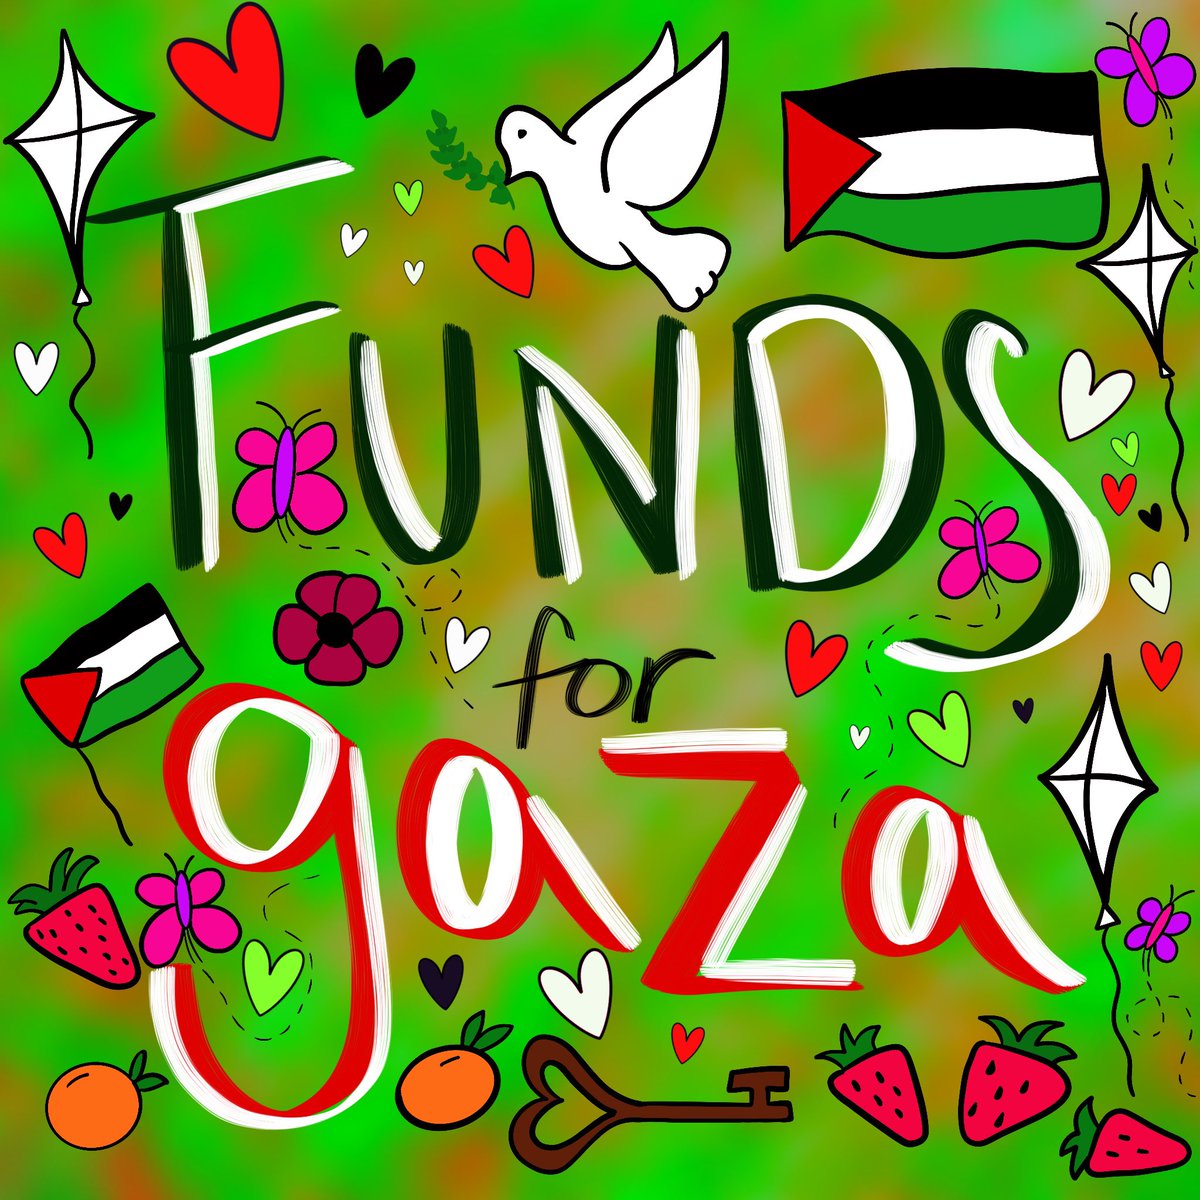 🧵 Funds for Palestinians in Gaza That Need Your Immediate Support! Please donate generously and share the following funds widely with everyone you know! 🇵🇸🕊️